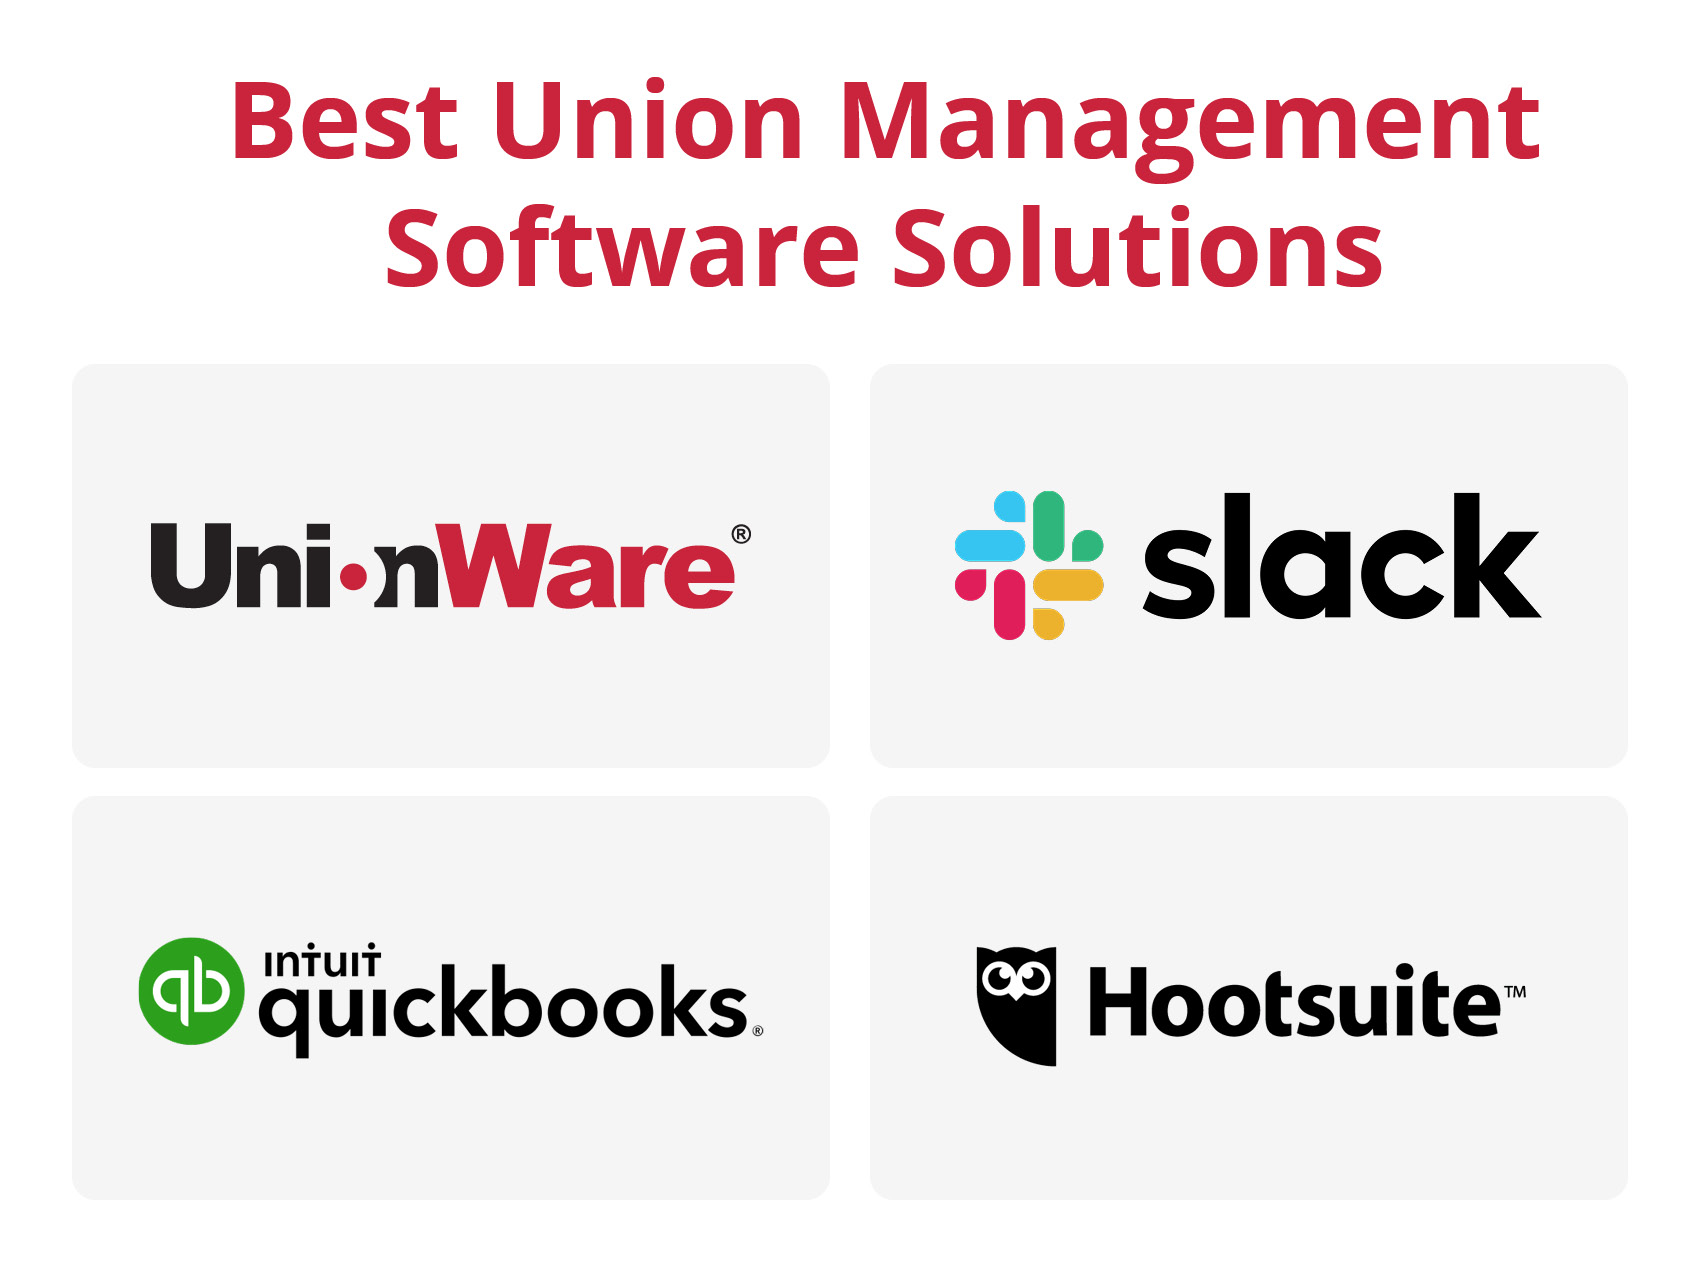 This image shows the logos of four best union management software solutions, covered in the text below.